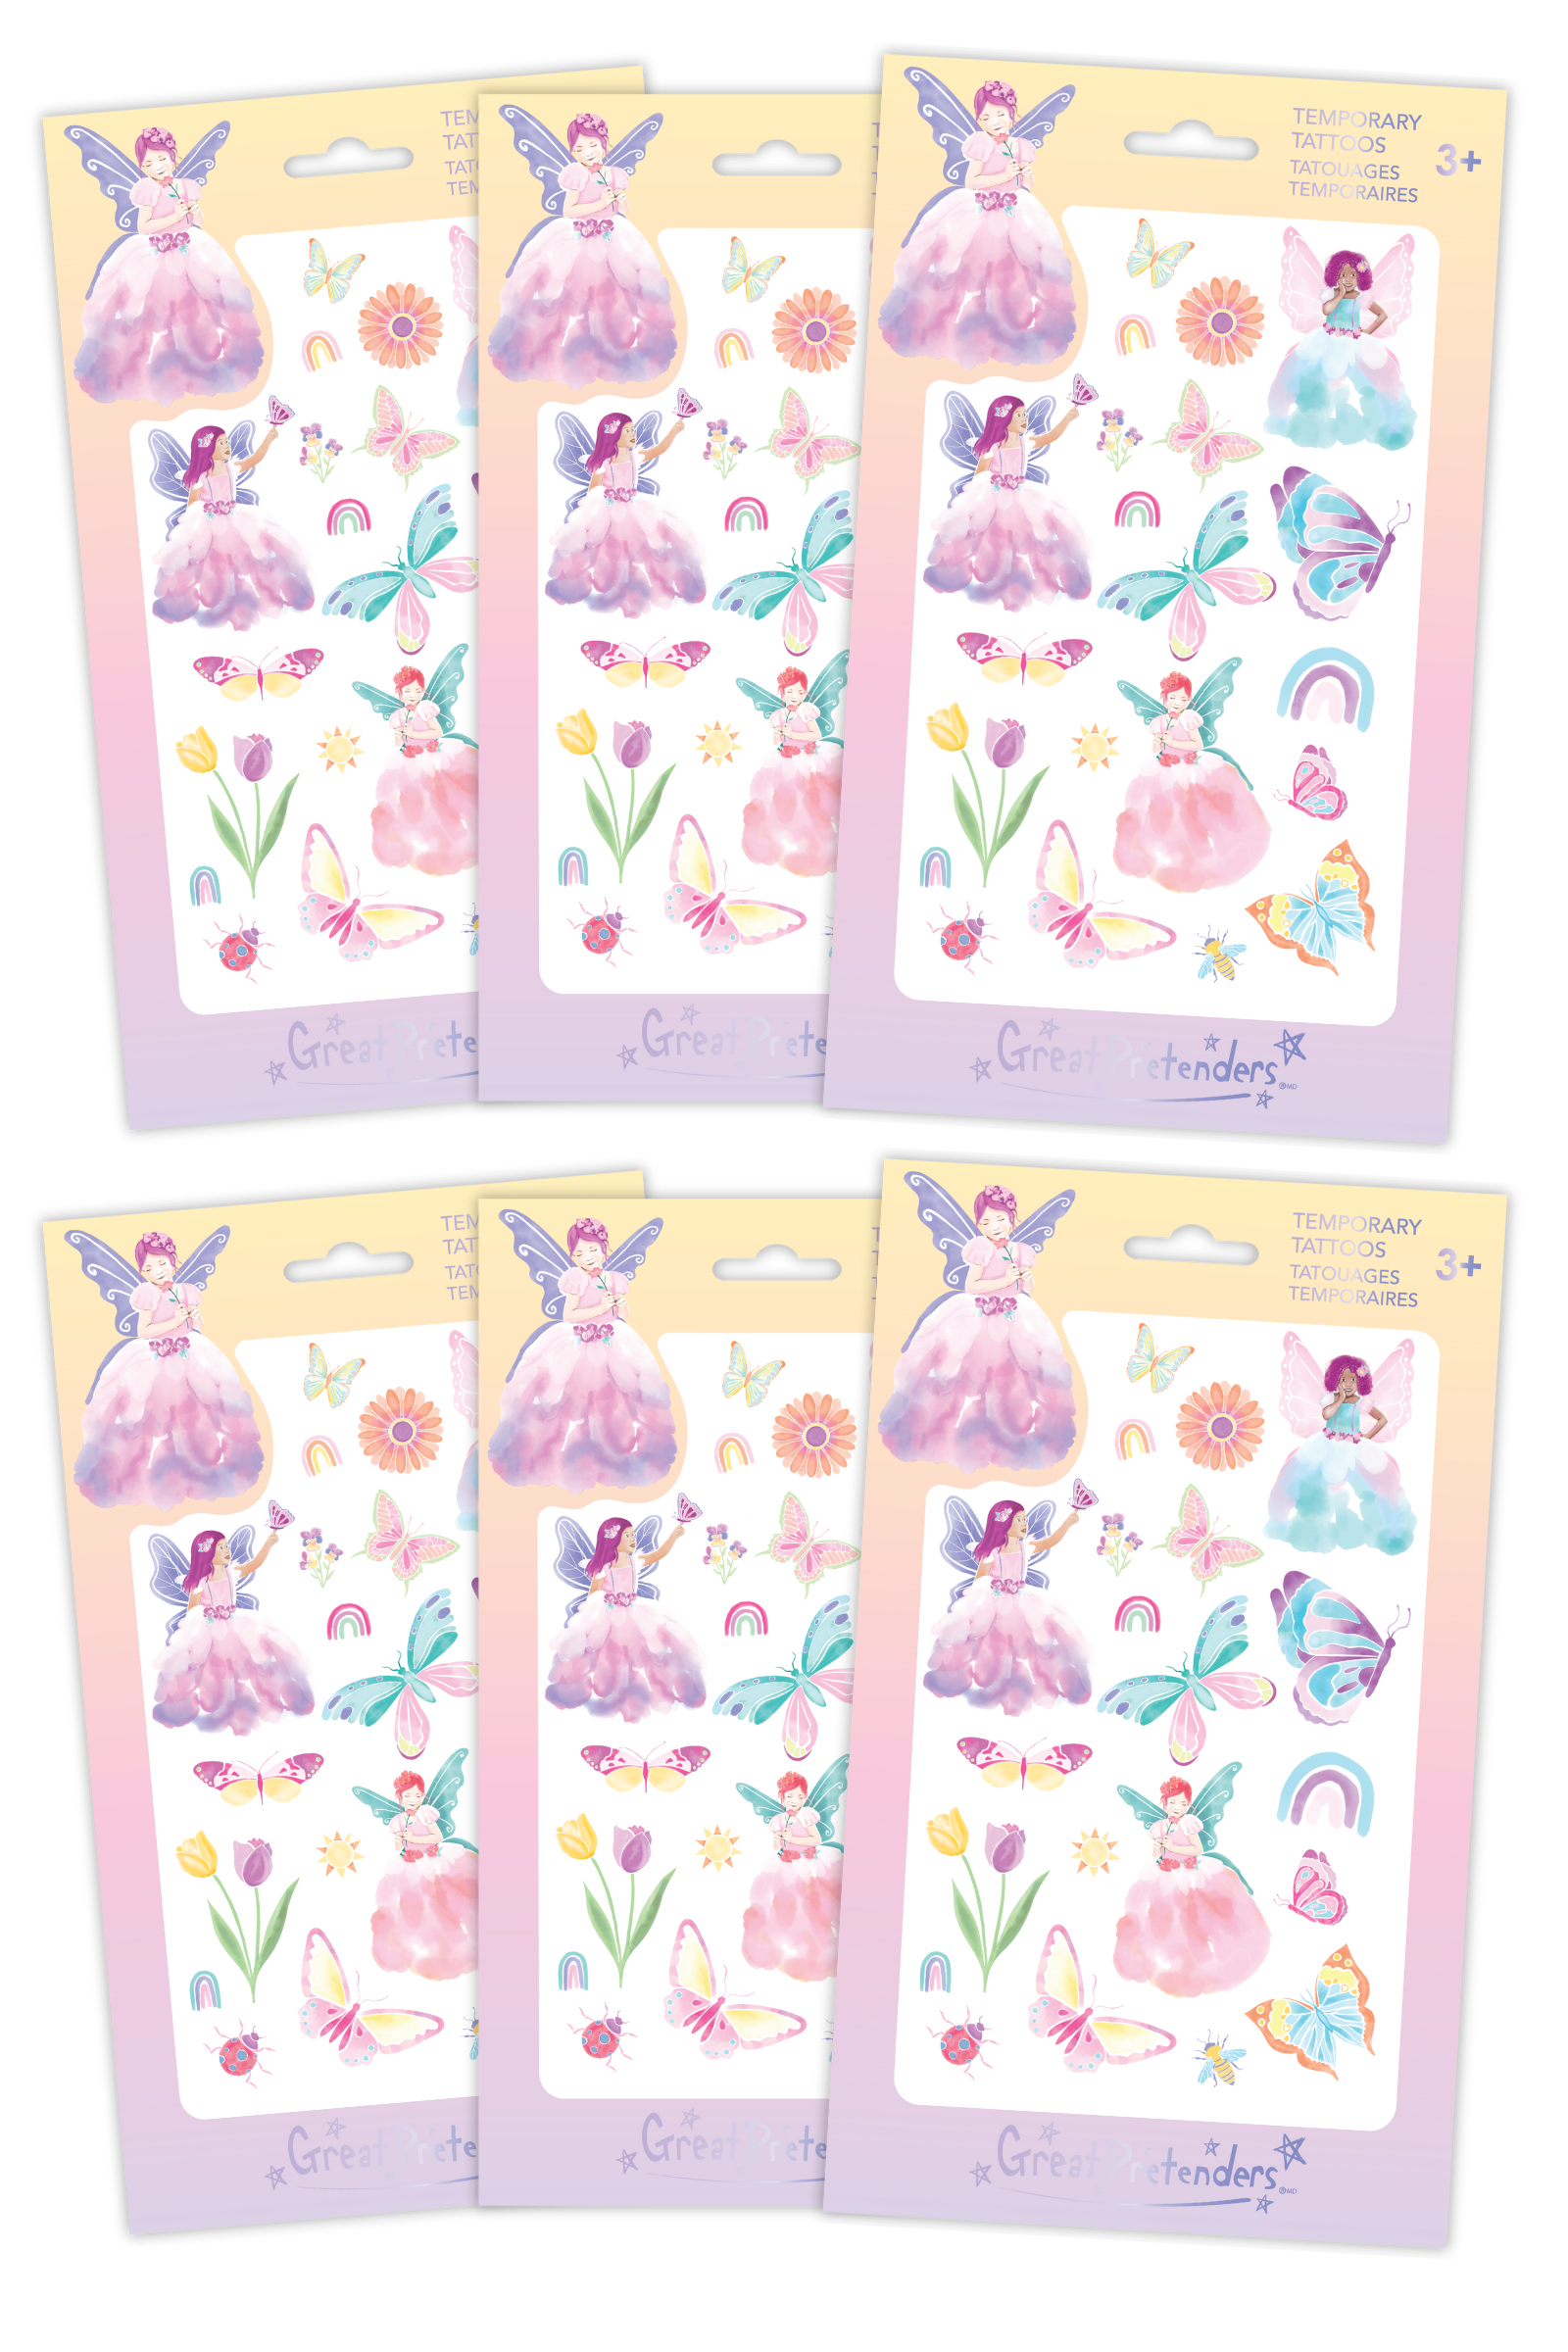 6 Packs of Butterfly Fairy Temporary Tattoos